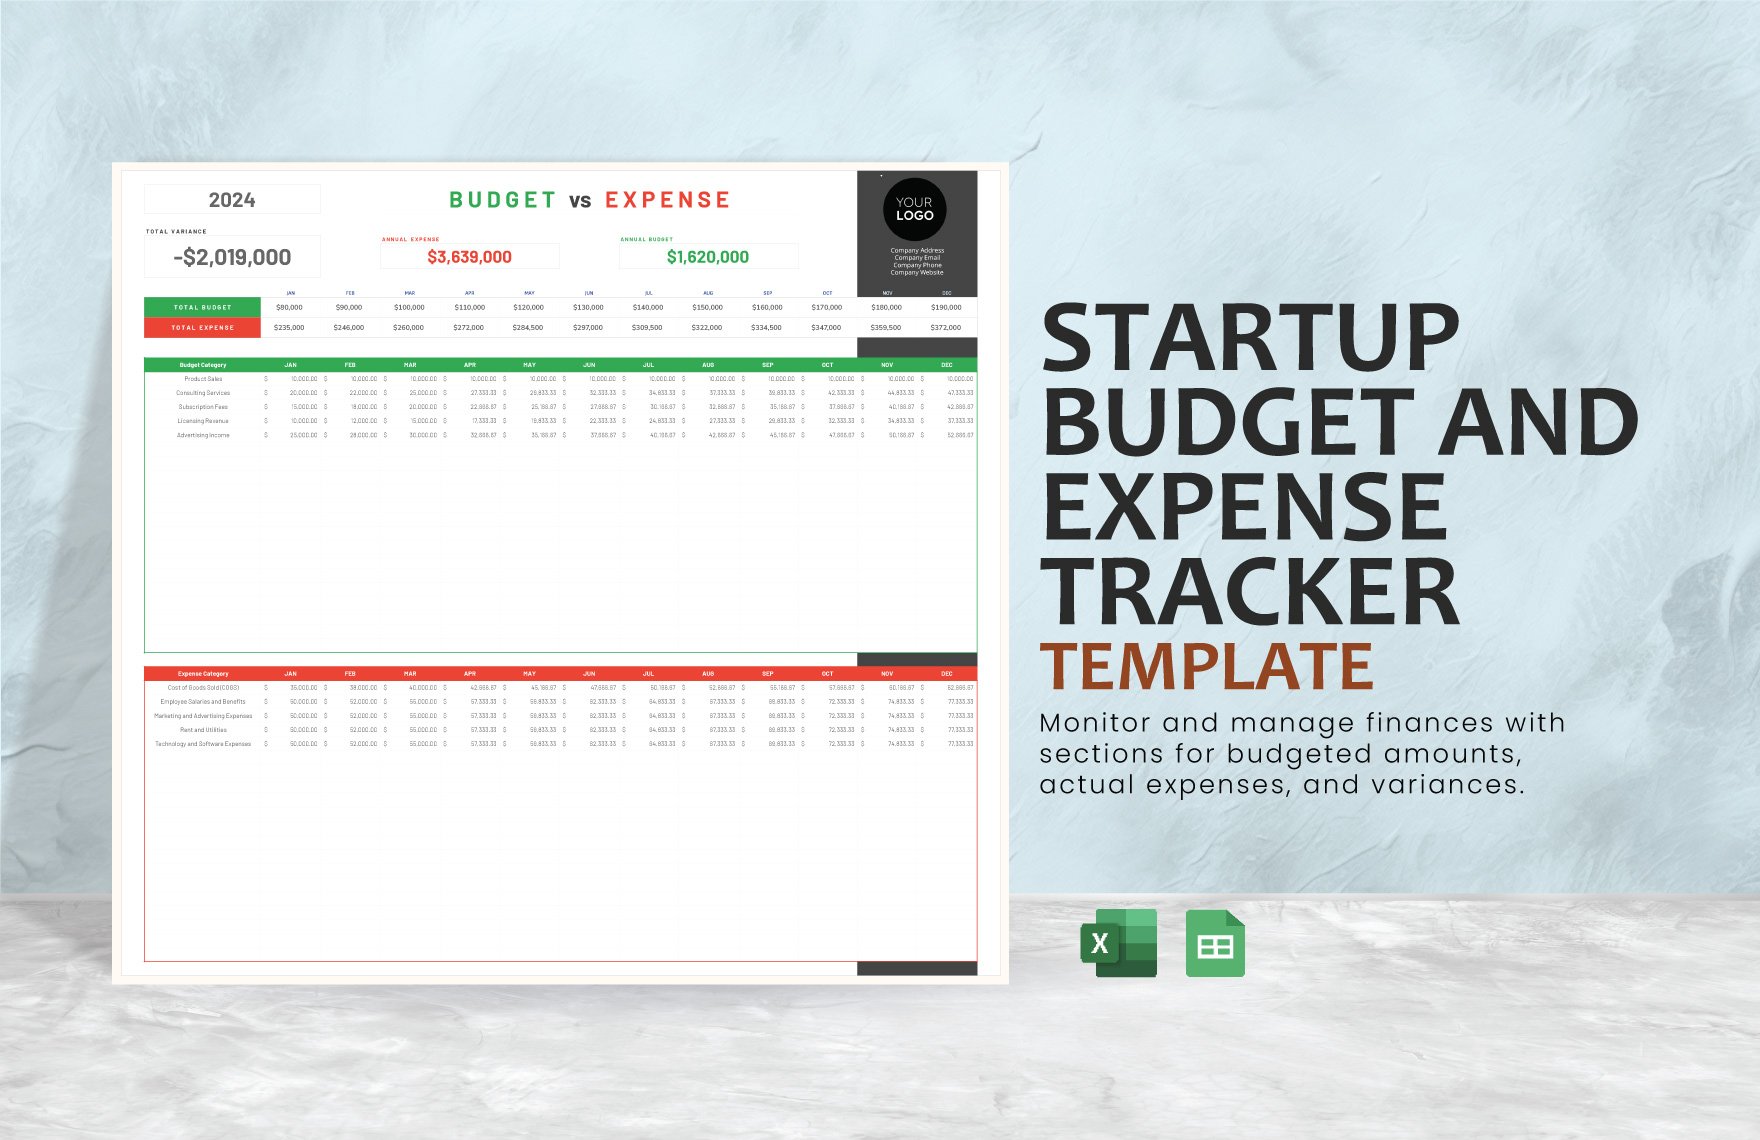 Startup Budget and Expense Tracker Template in Excel, Google Sheets